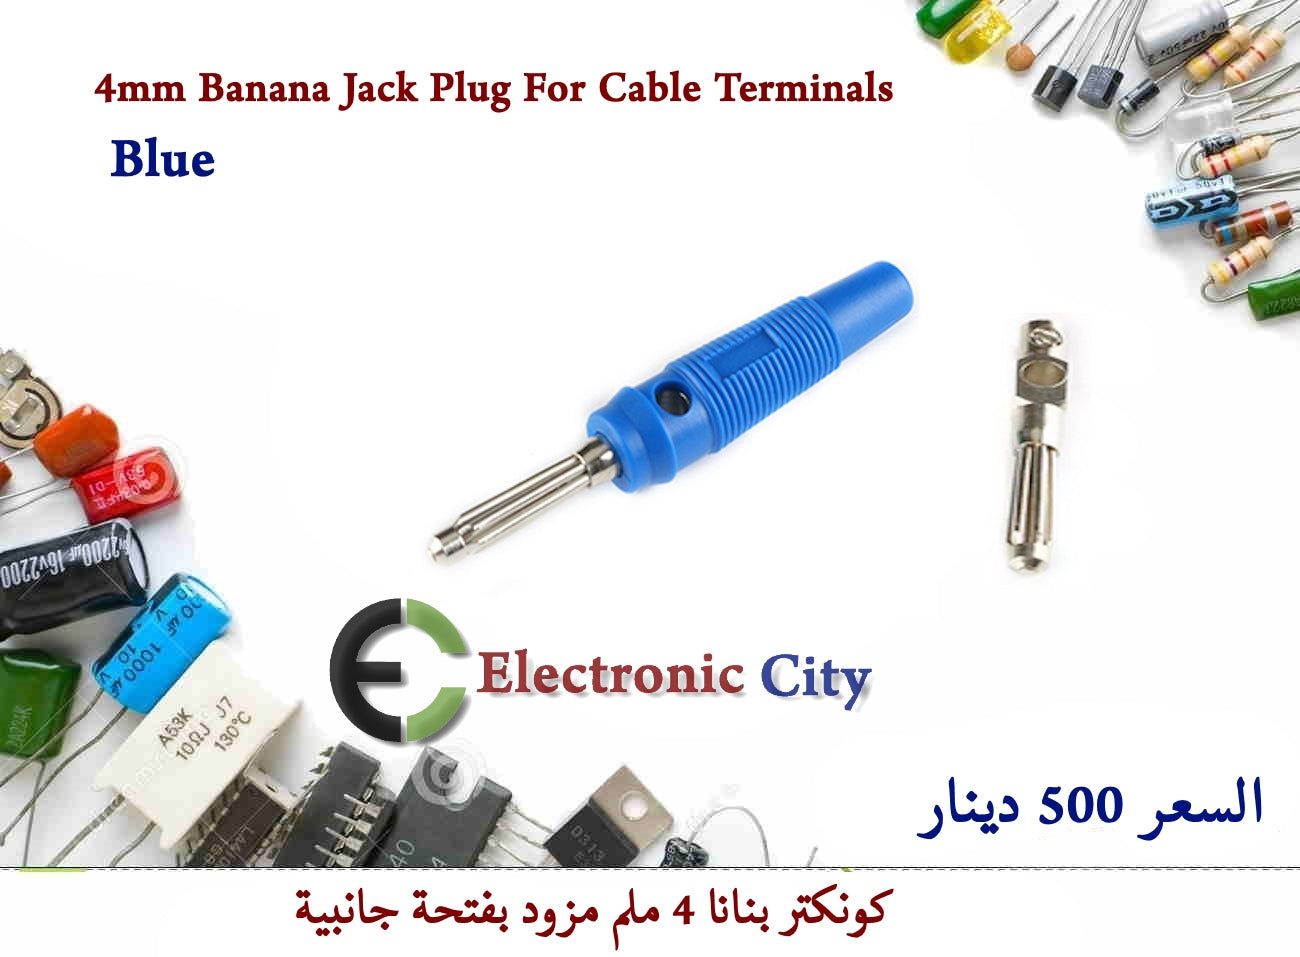 4mm Banana Jack Plug For Cable Terminals Blue